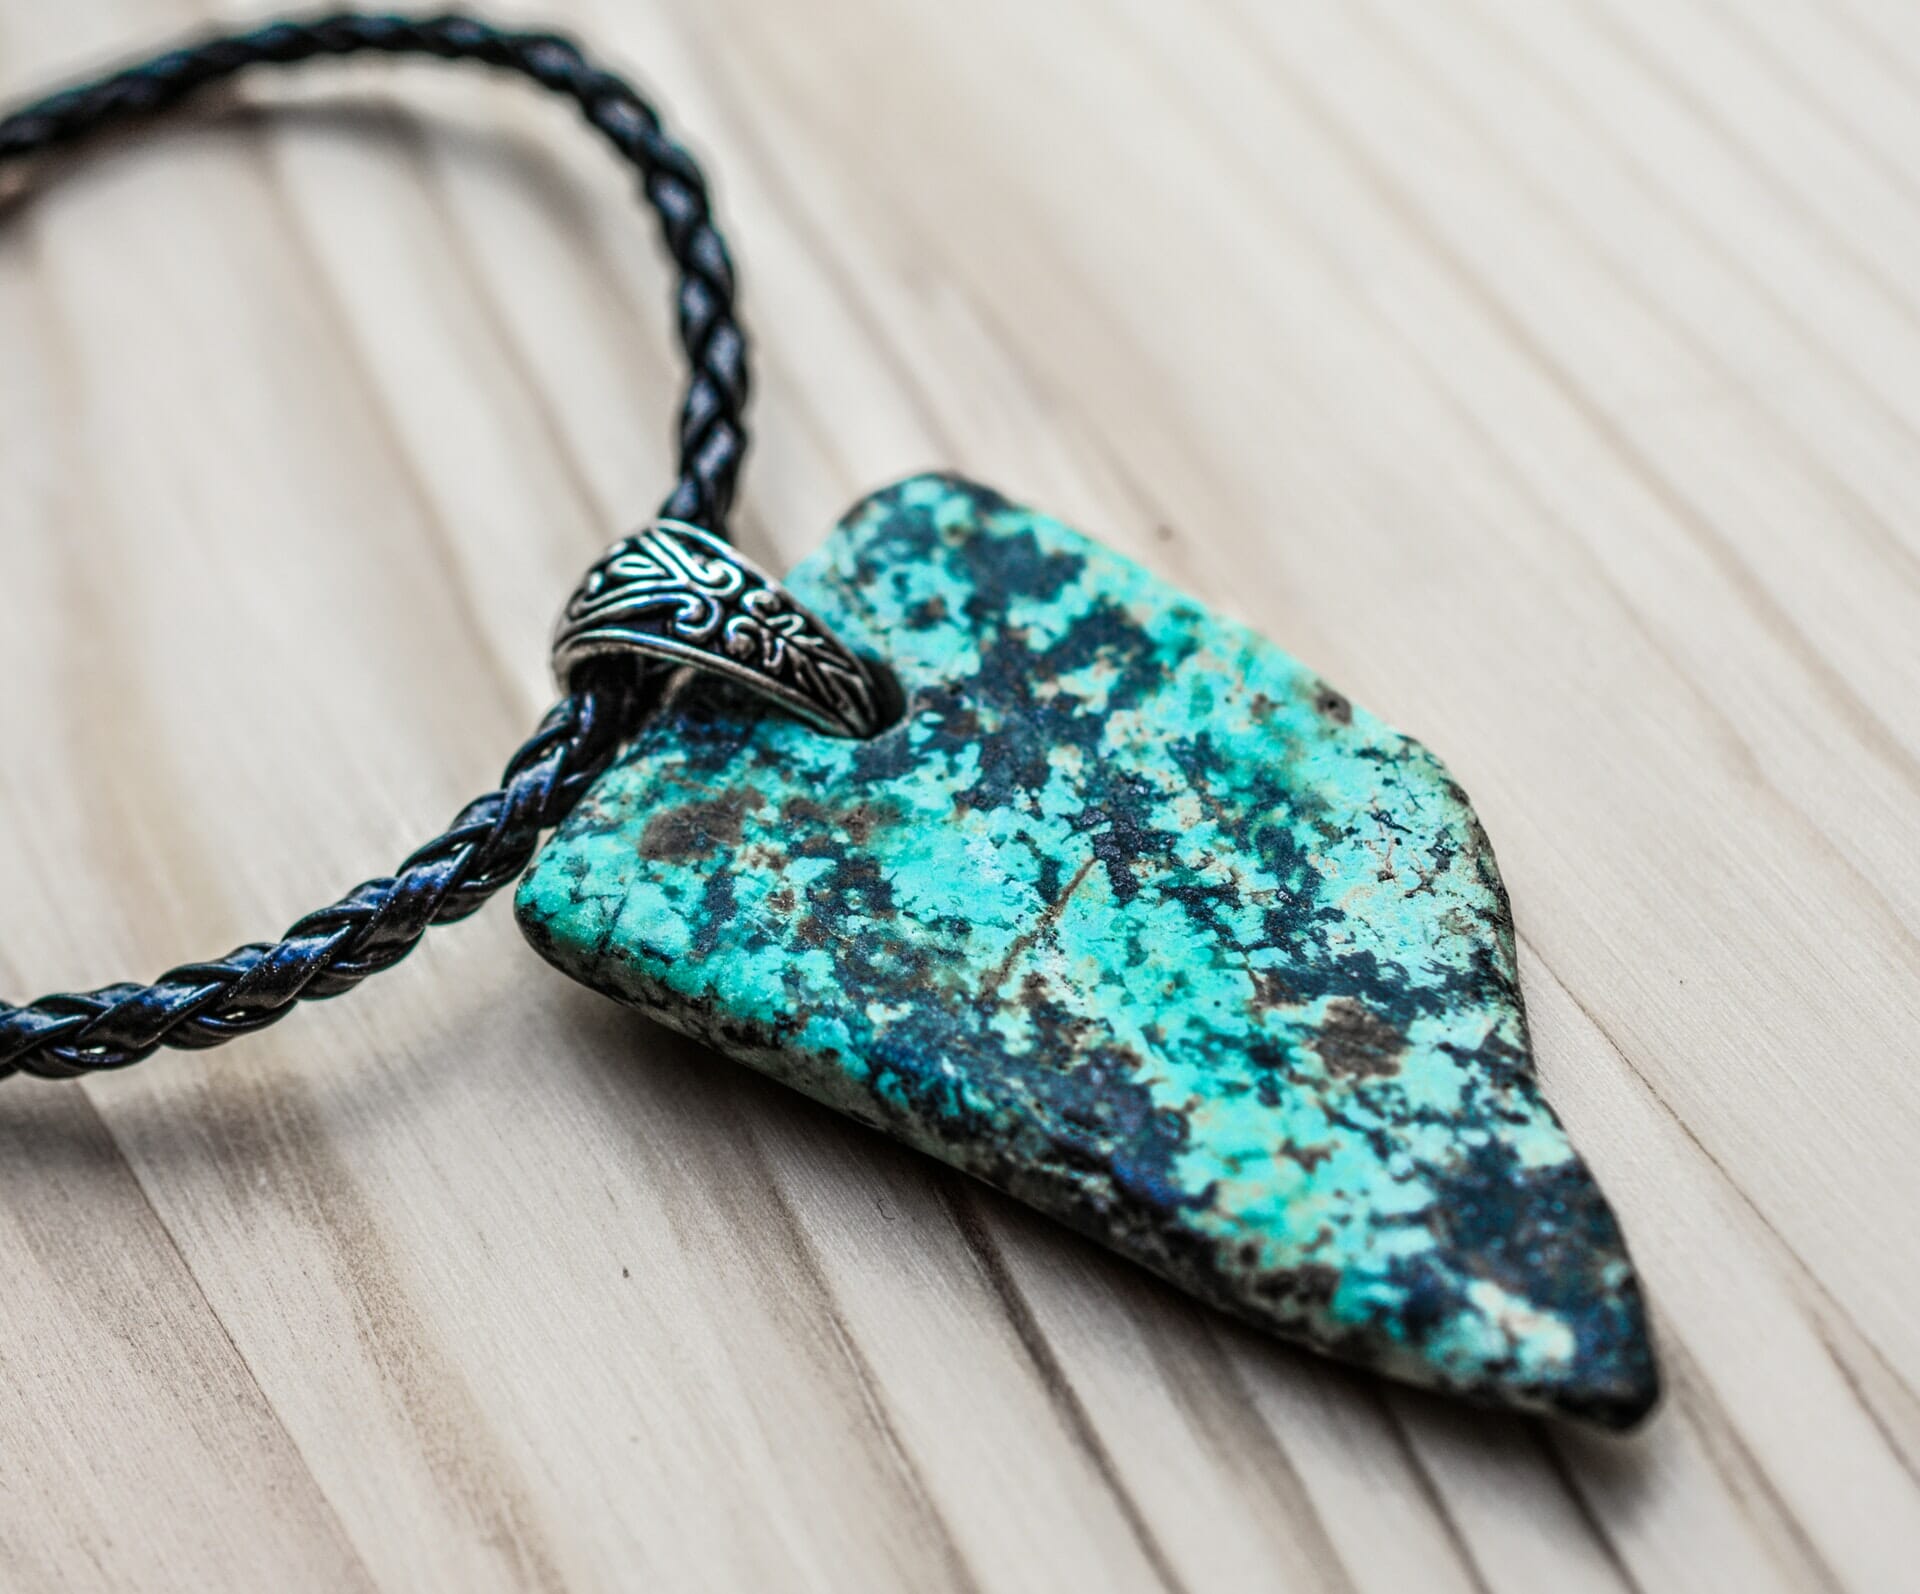 Turquoise necklace pendant example that may be at the Tuscon Gem and Mineral Show.